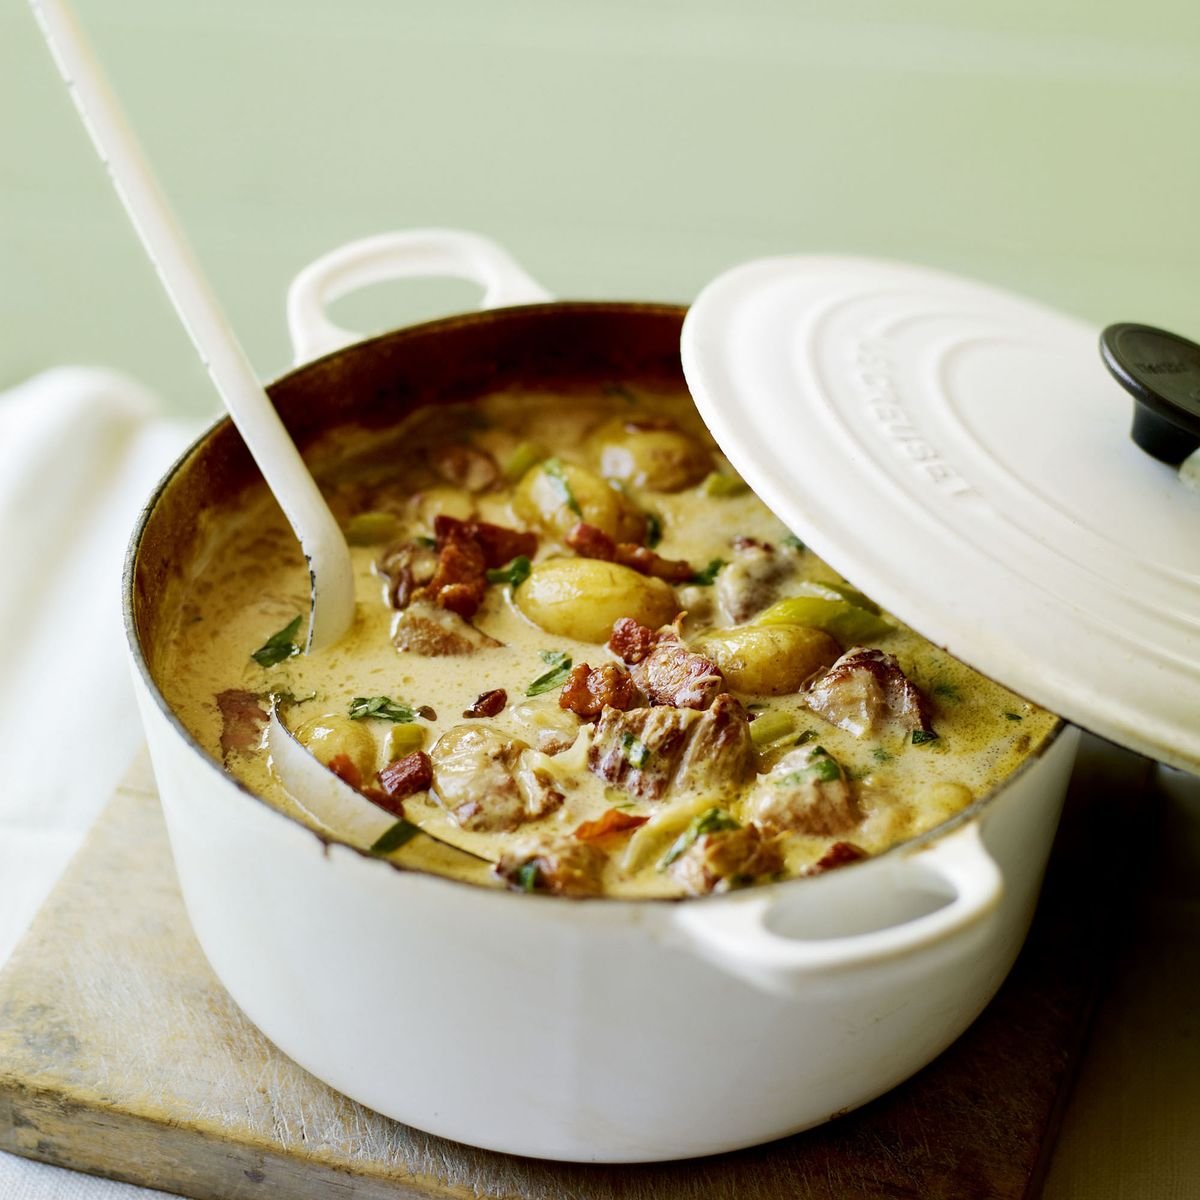 Normandy pork casserole with cider and smoked bacon lardons